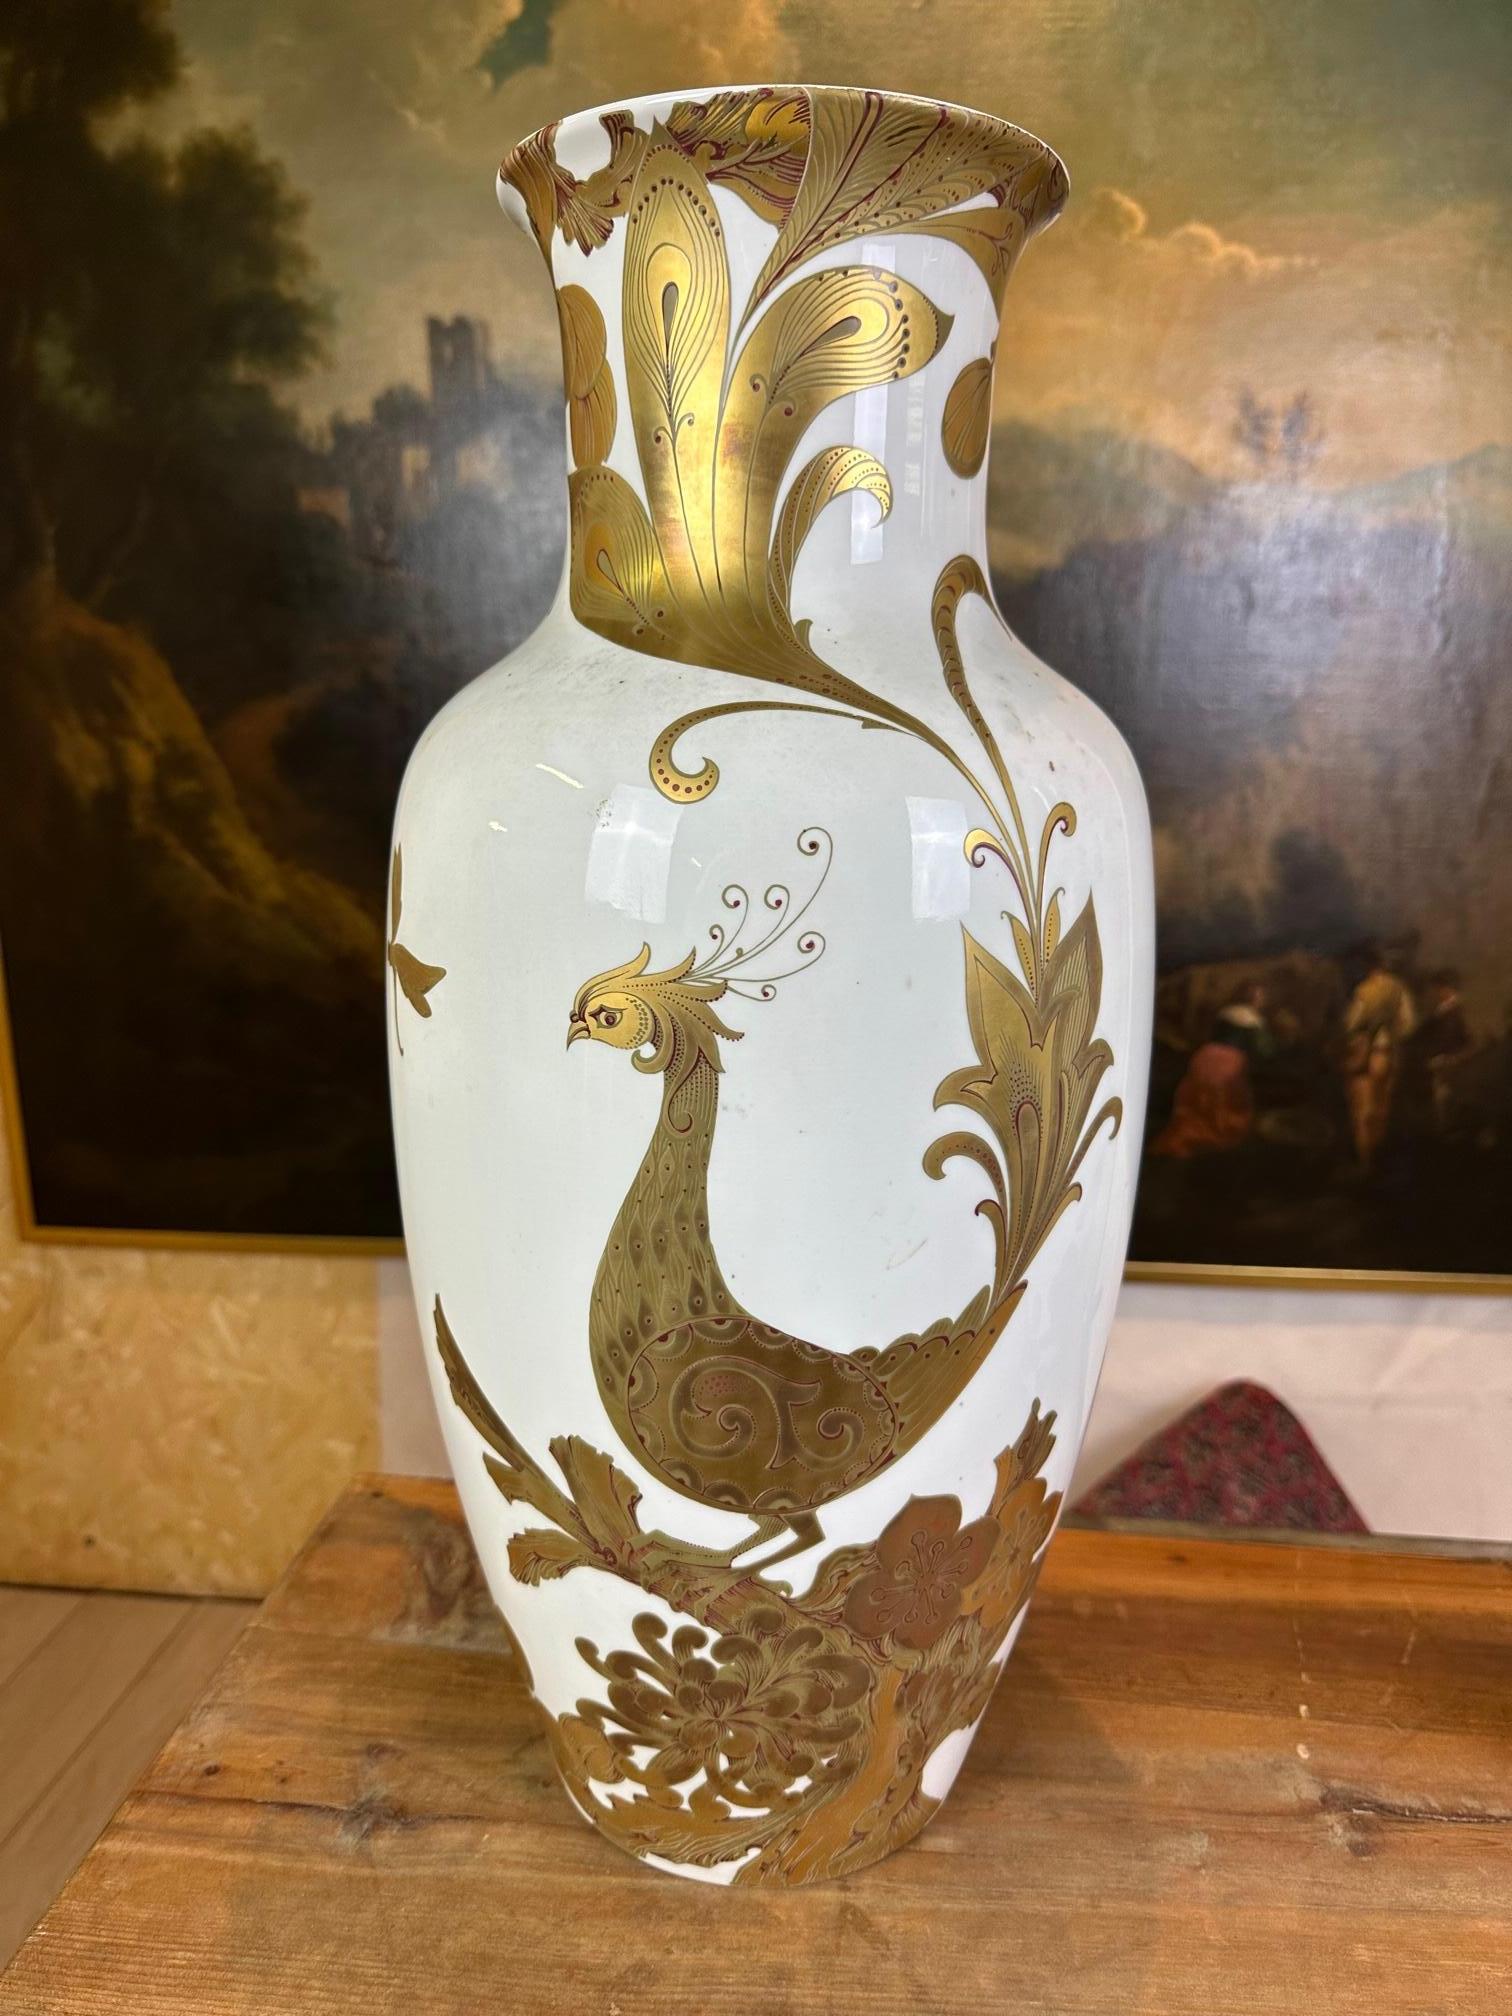 Pair of elegant German Kaiser porcelain vases with Serenade decoration.
They are really interesting because of their fine pure gold decoration, worked in the round with floral motifs, in fact you can see the famous bird of paradise and butterflies.